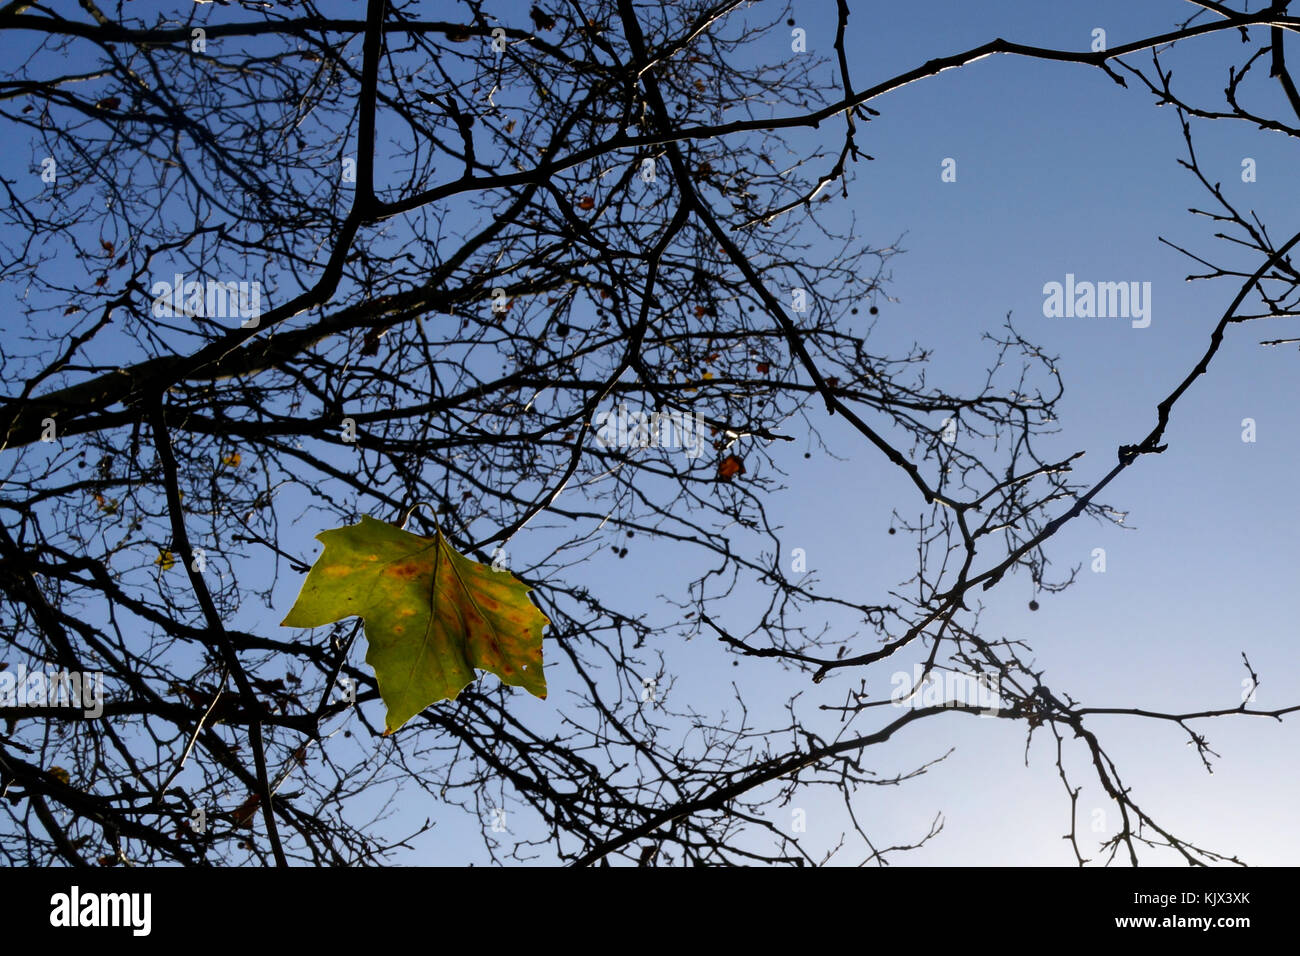 A final Autumn leaf on a tree in Green Park, London Stock Photo